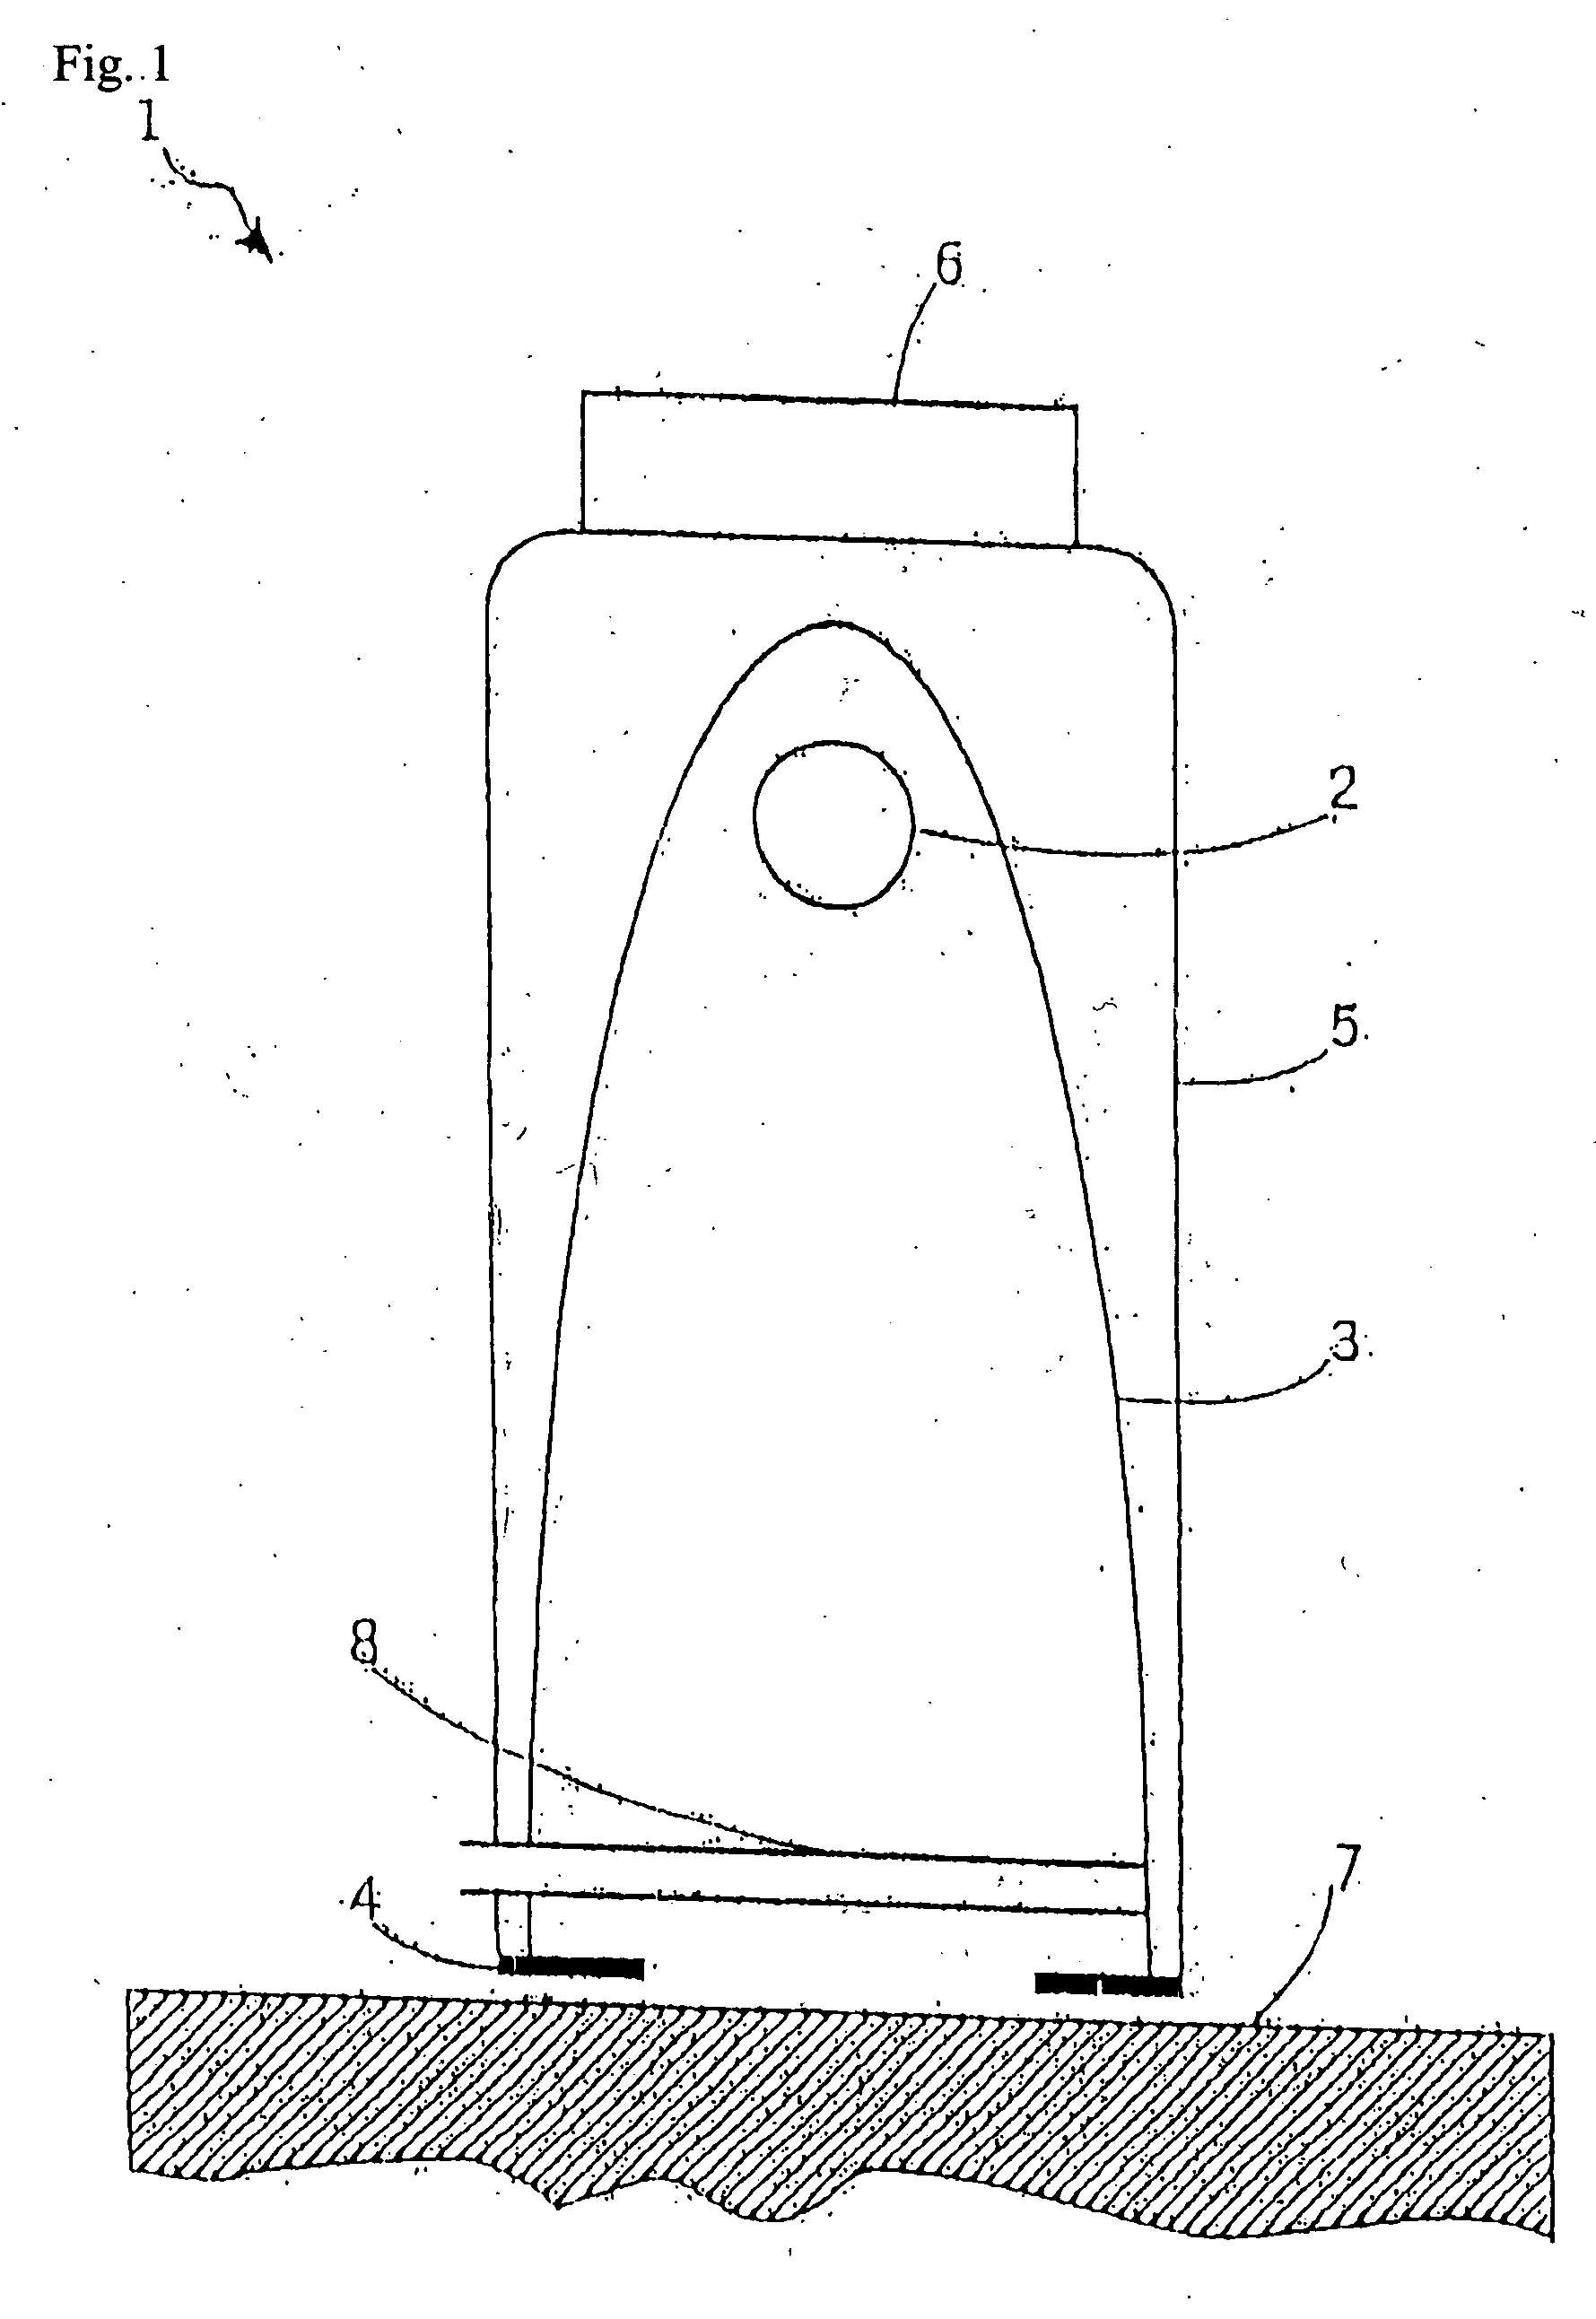 Irradiation device for therapeutic treatment of skin diseases and other ailments